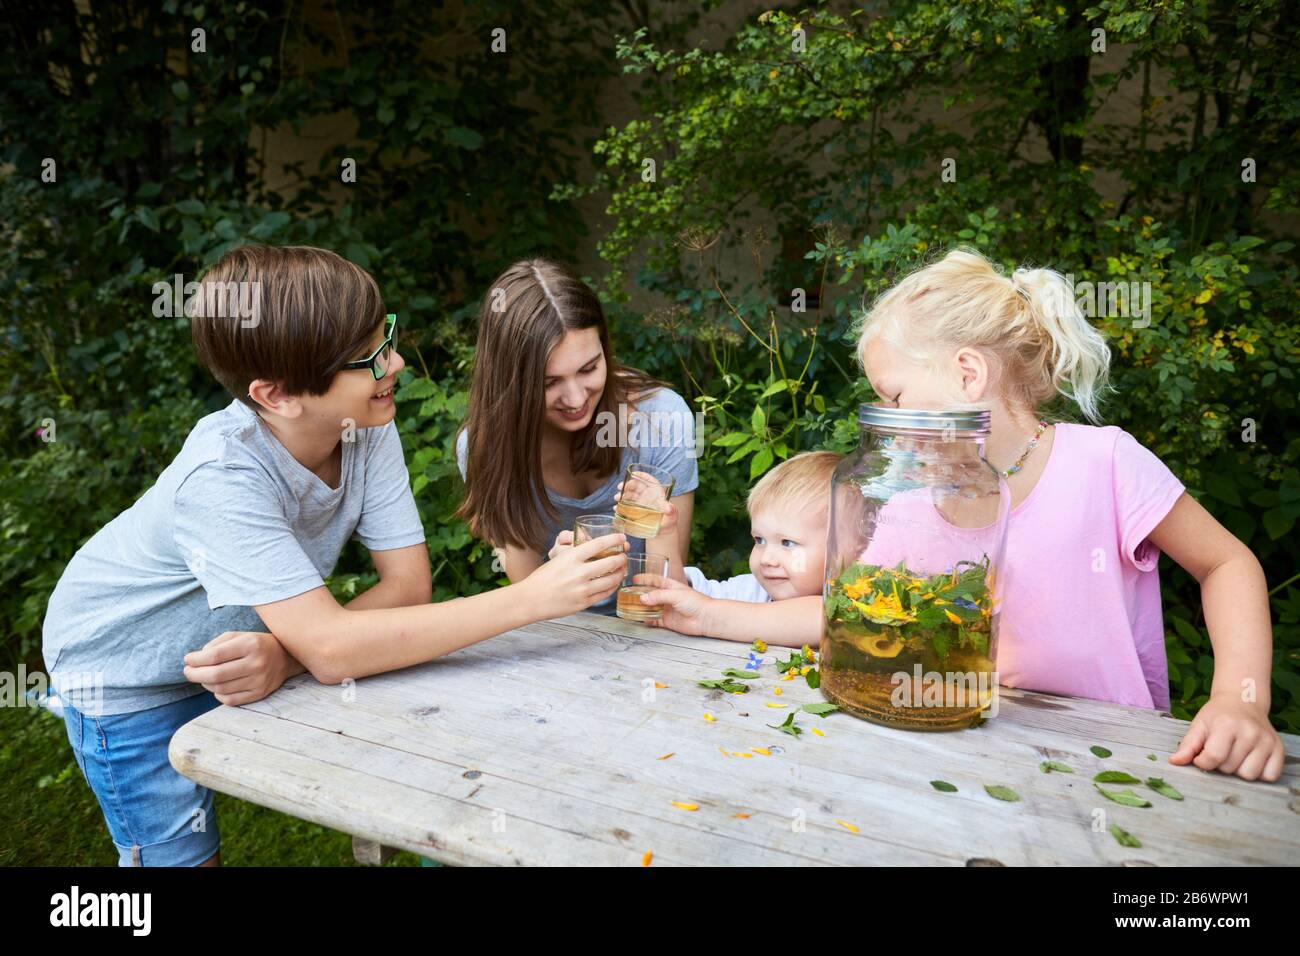 Children investigating food. Series: Preparation of a herbal drink. Tasting the ready drink. Learning according to the Reggio Pedagogy principle, playful understanding and discovery. Germany. Stock Photo